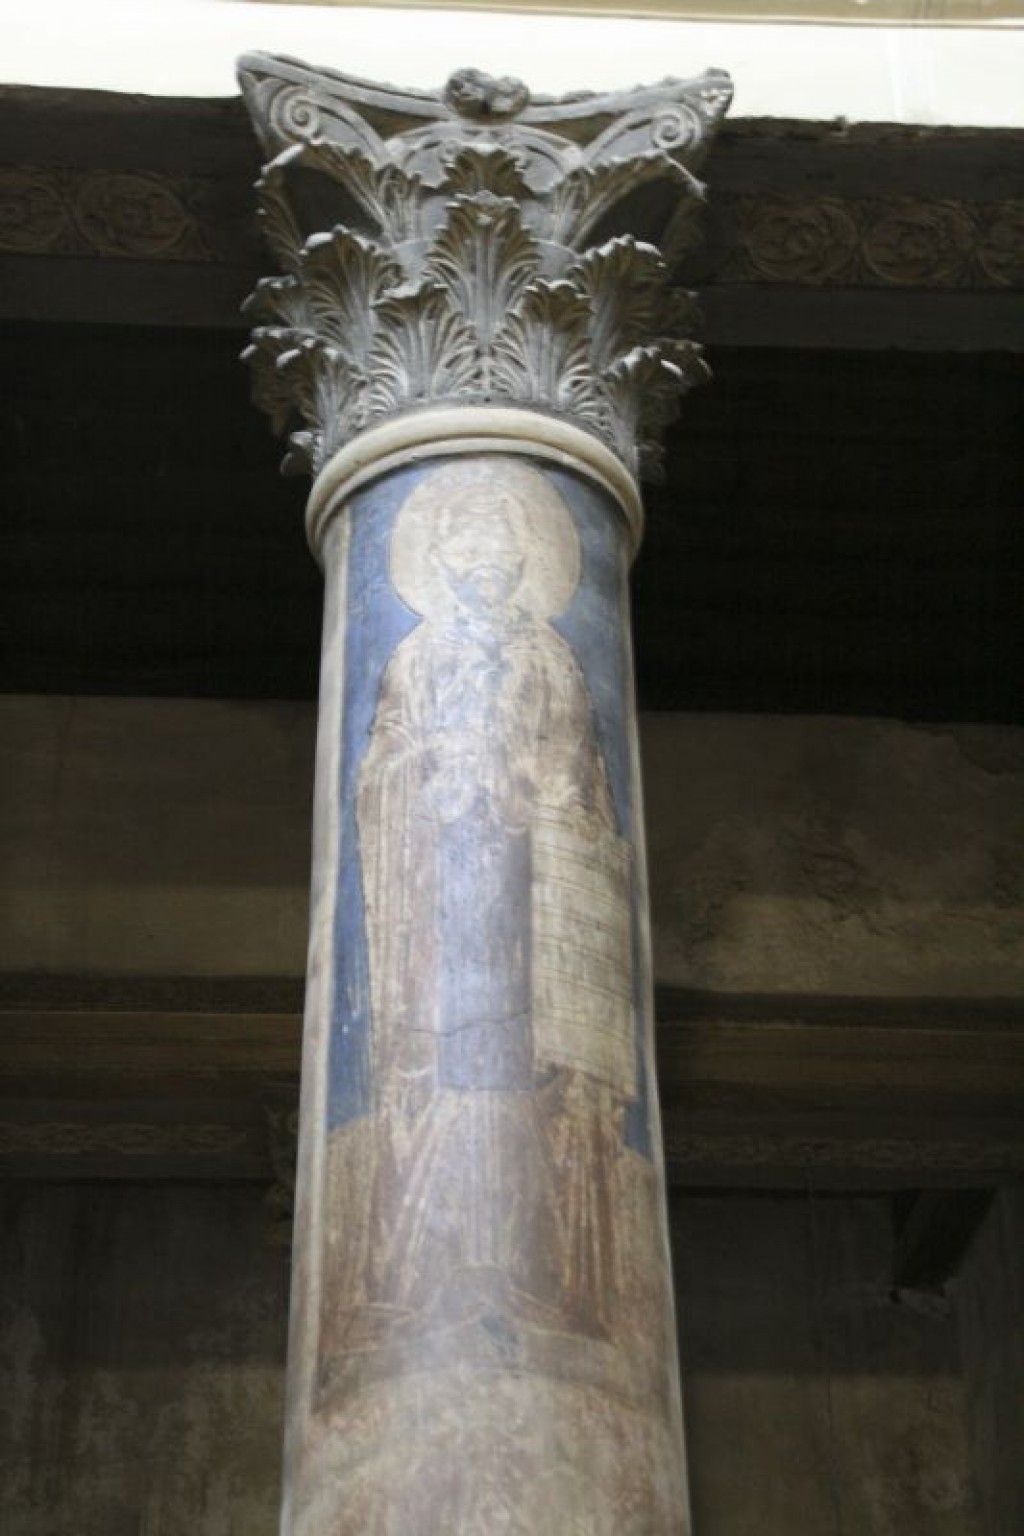 Frescoe on one of the columns in the Church of the Nativity (Basilica of the Nativity).